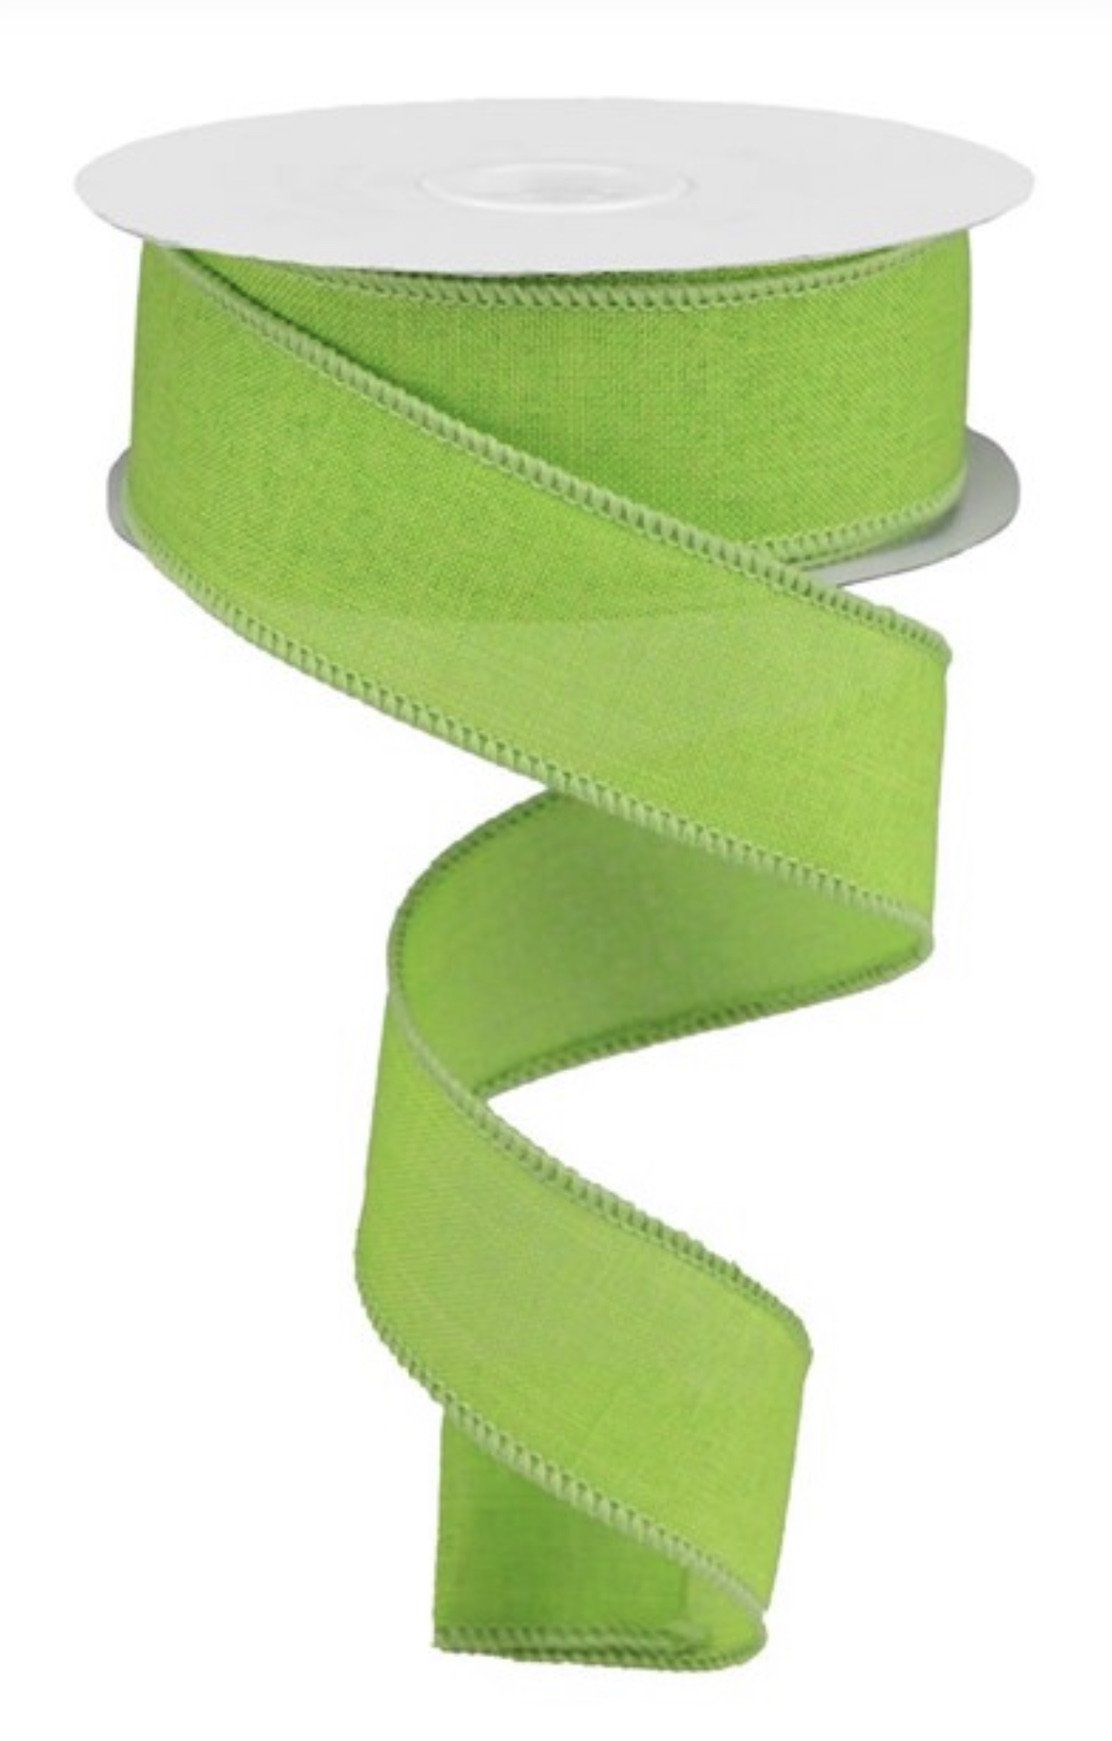 Lime green Solid 1.5” - Greenery MarketWired ribbonrg1278e9